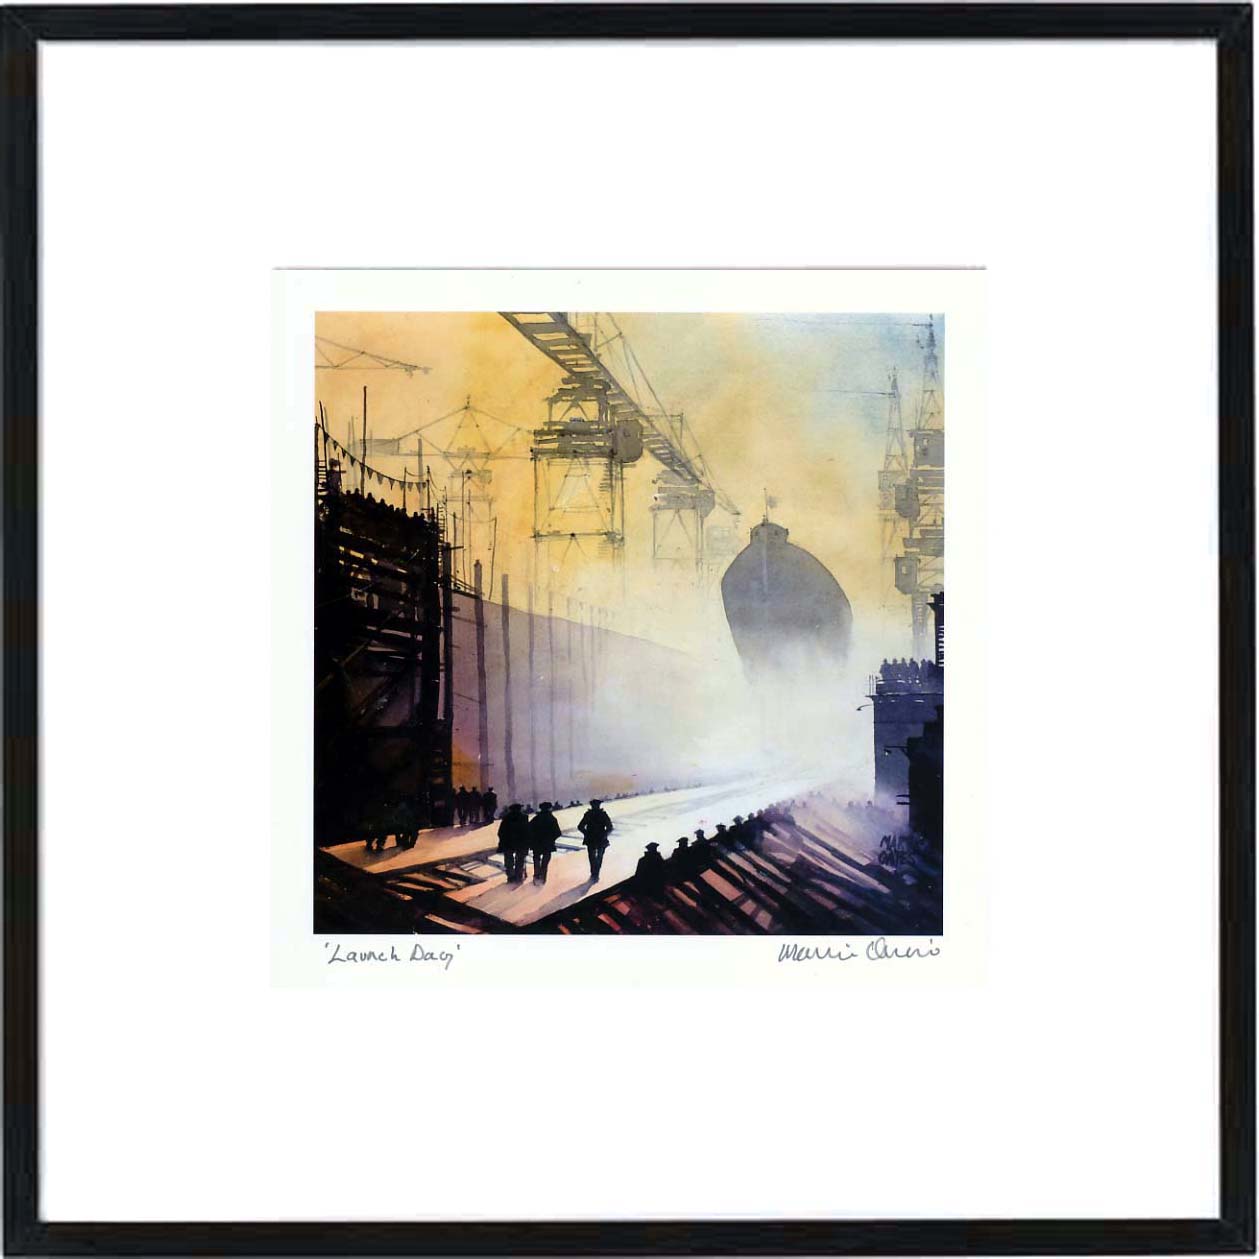 Launch Day Framed Print